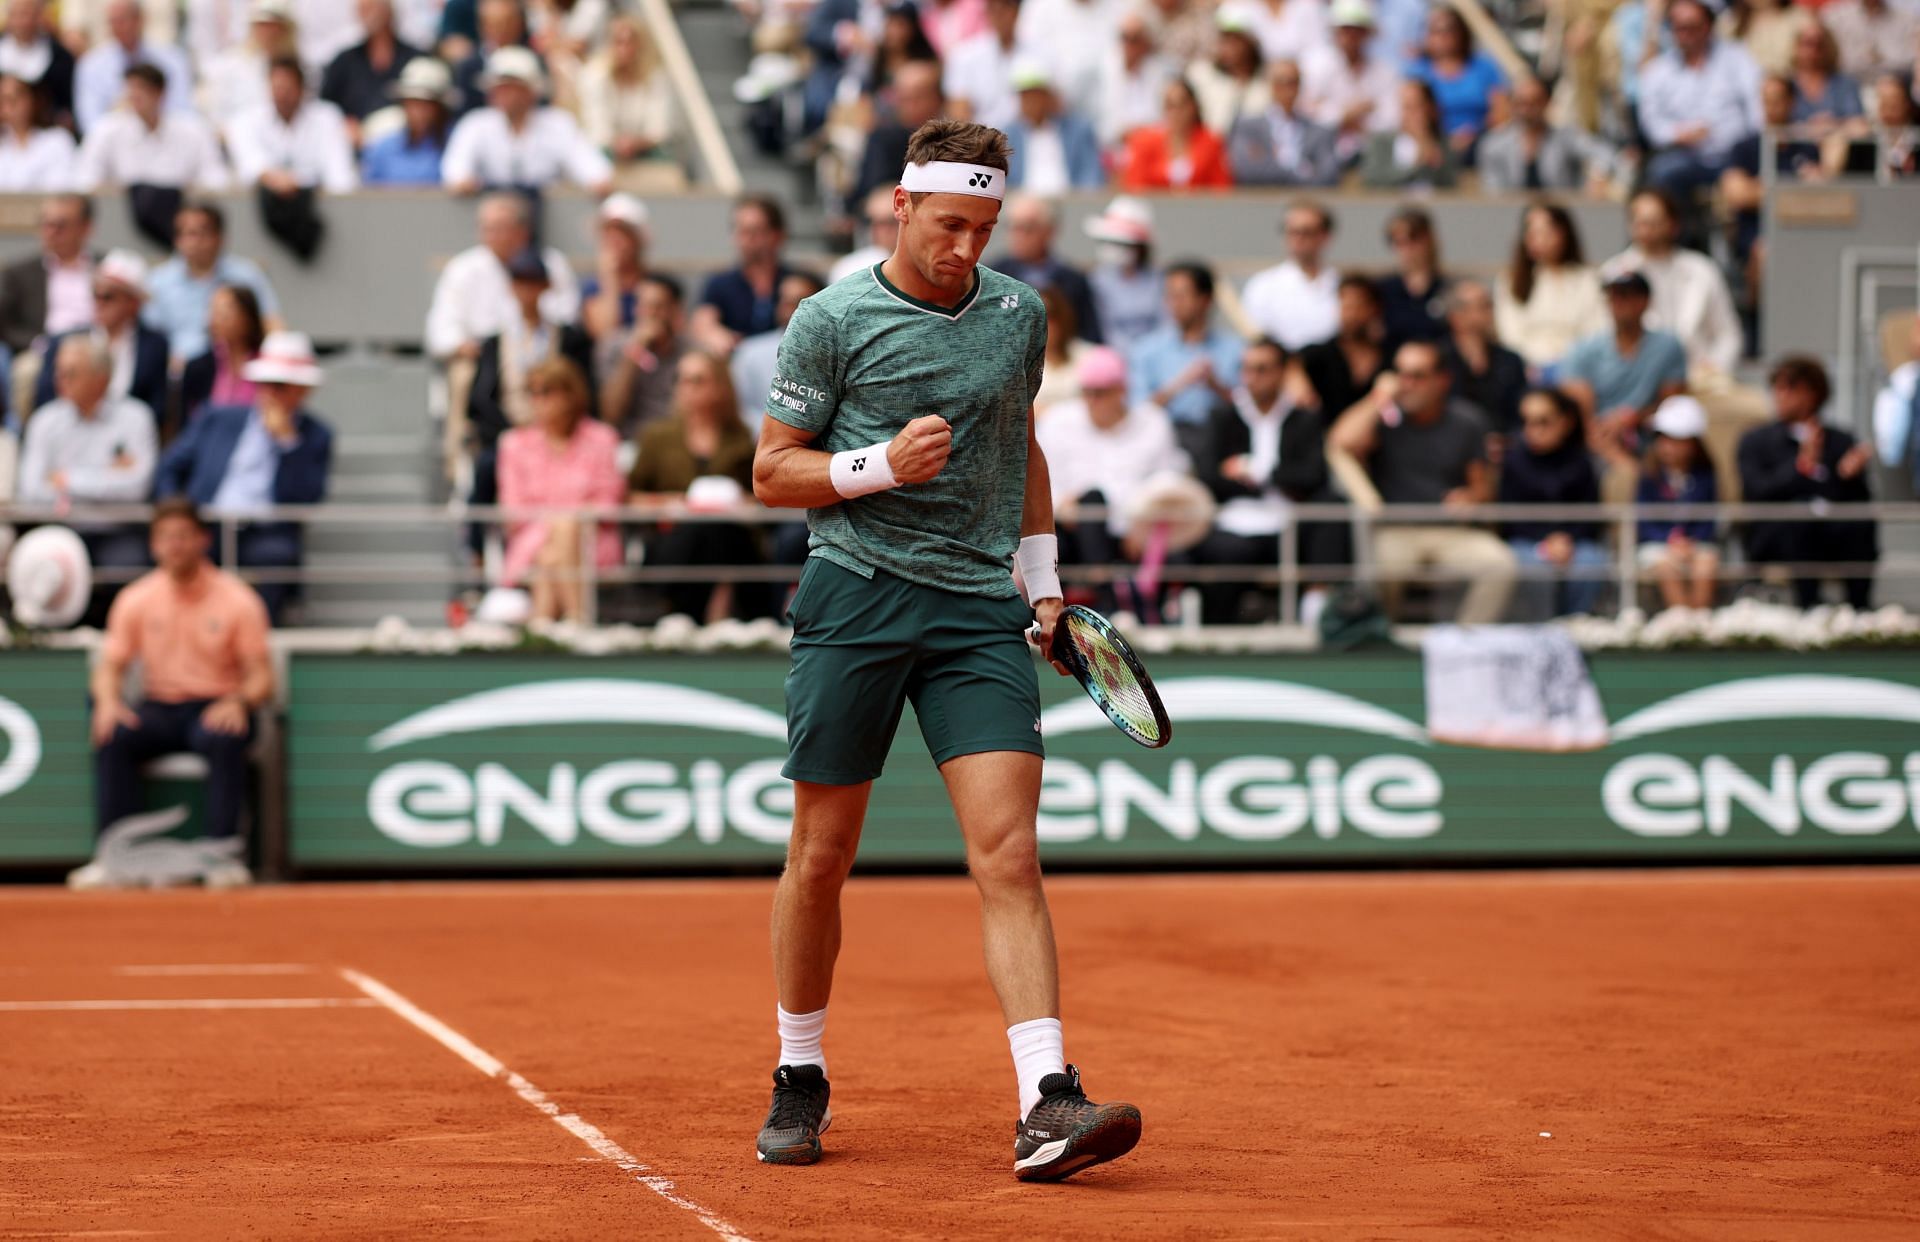 Casper Ruud faced Rafael Nadal for the very first time in the finals of the French Open